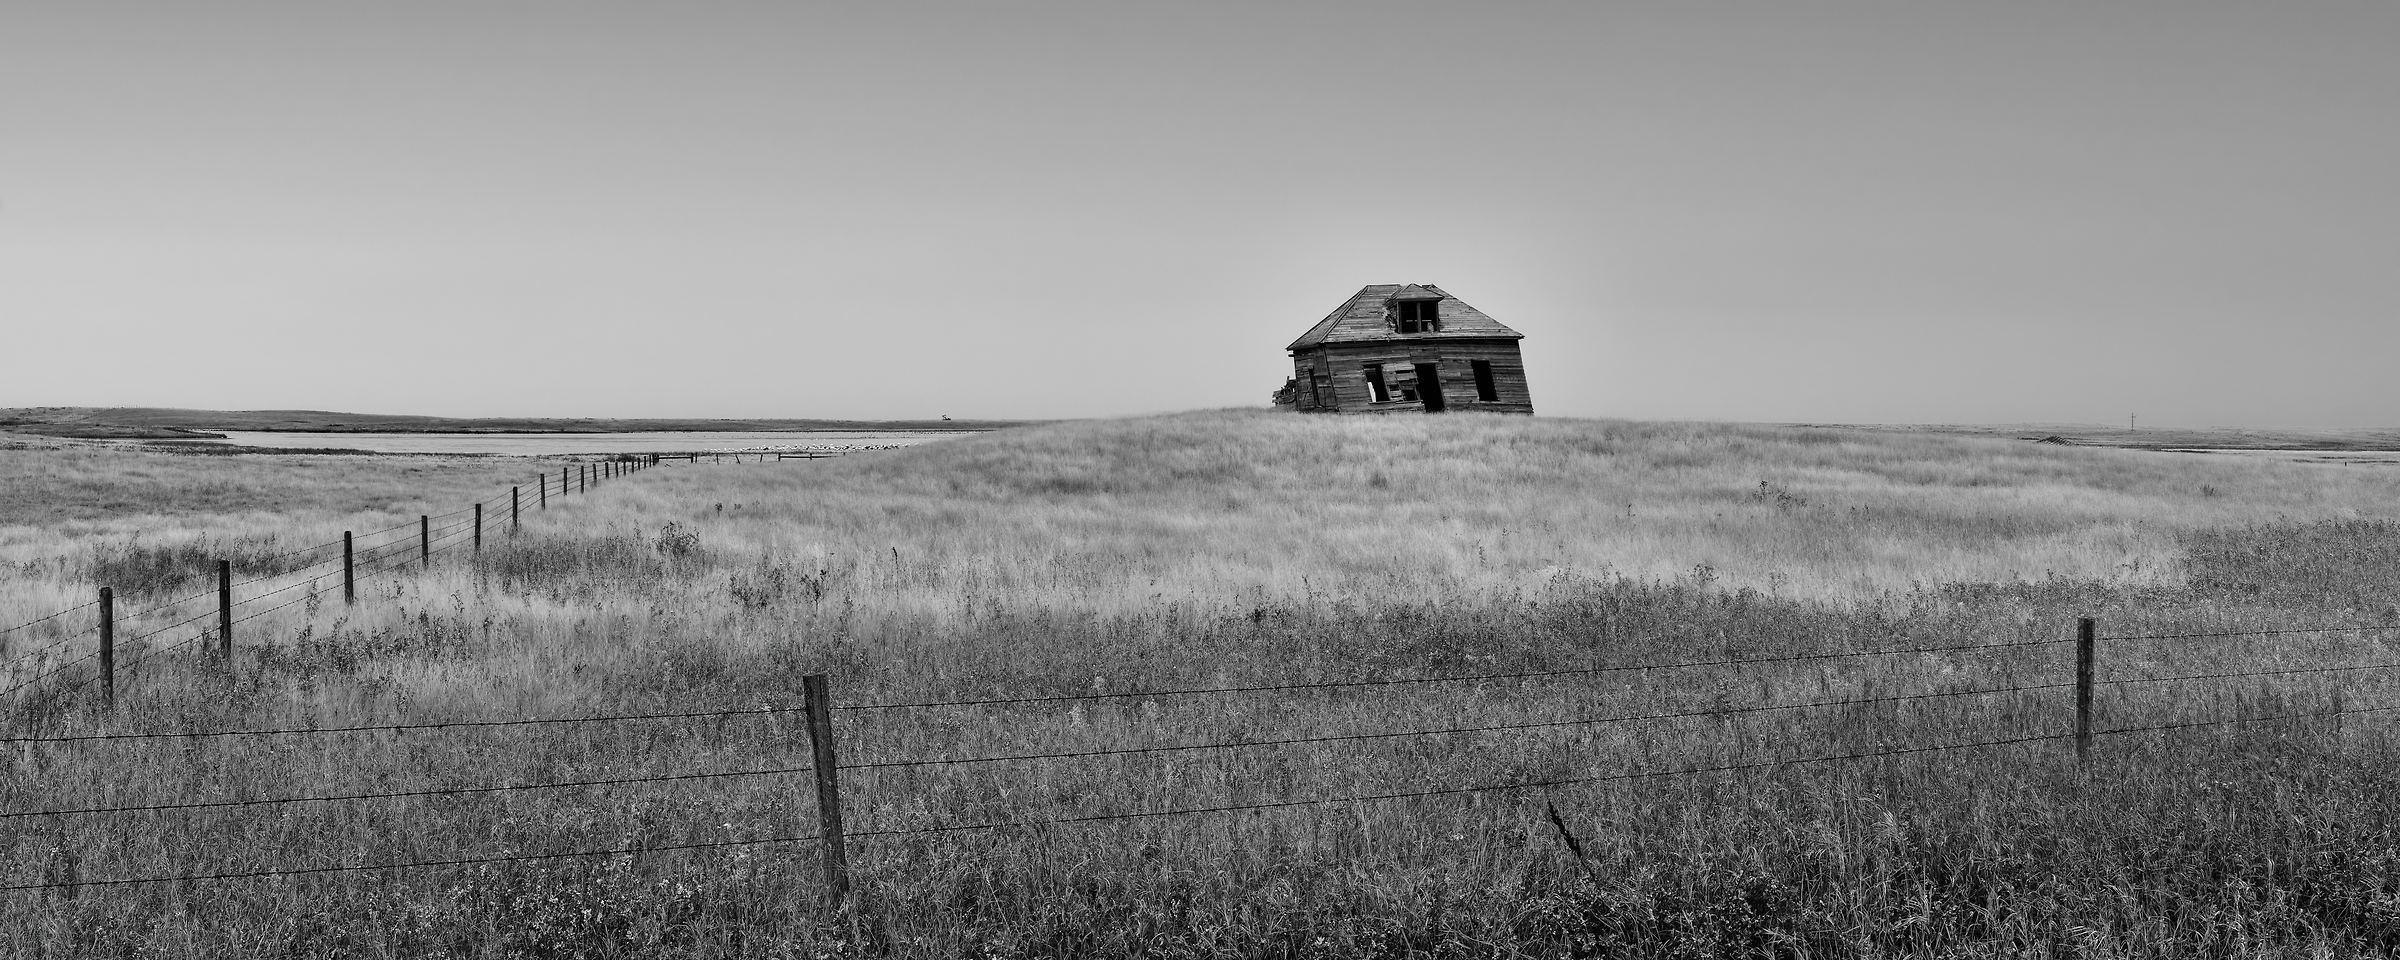 863 megapixels! A very high resolution, large-format VAST photo print of an abandoned house in a prairie; landscape photograph created by Scott Dimond in 